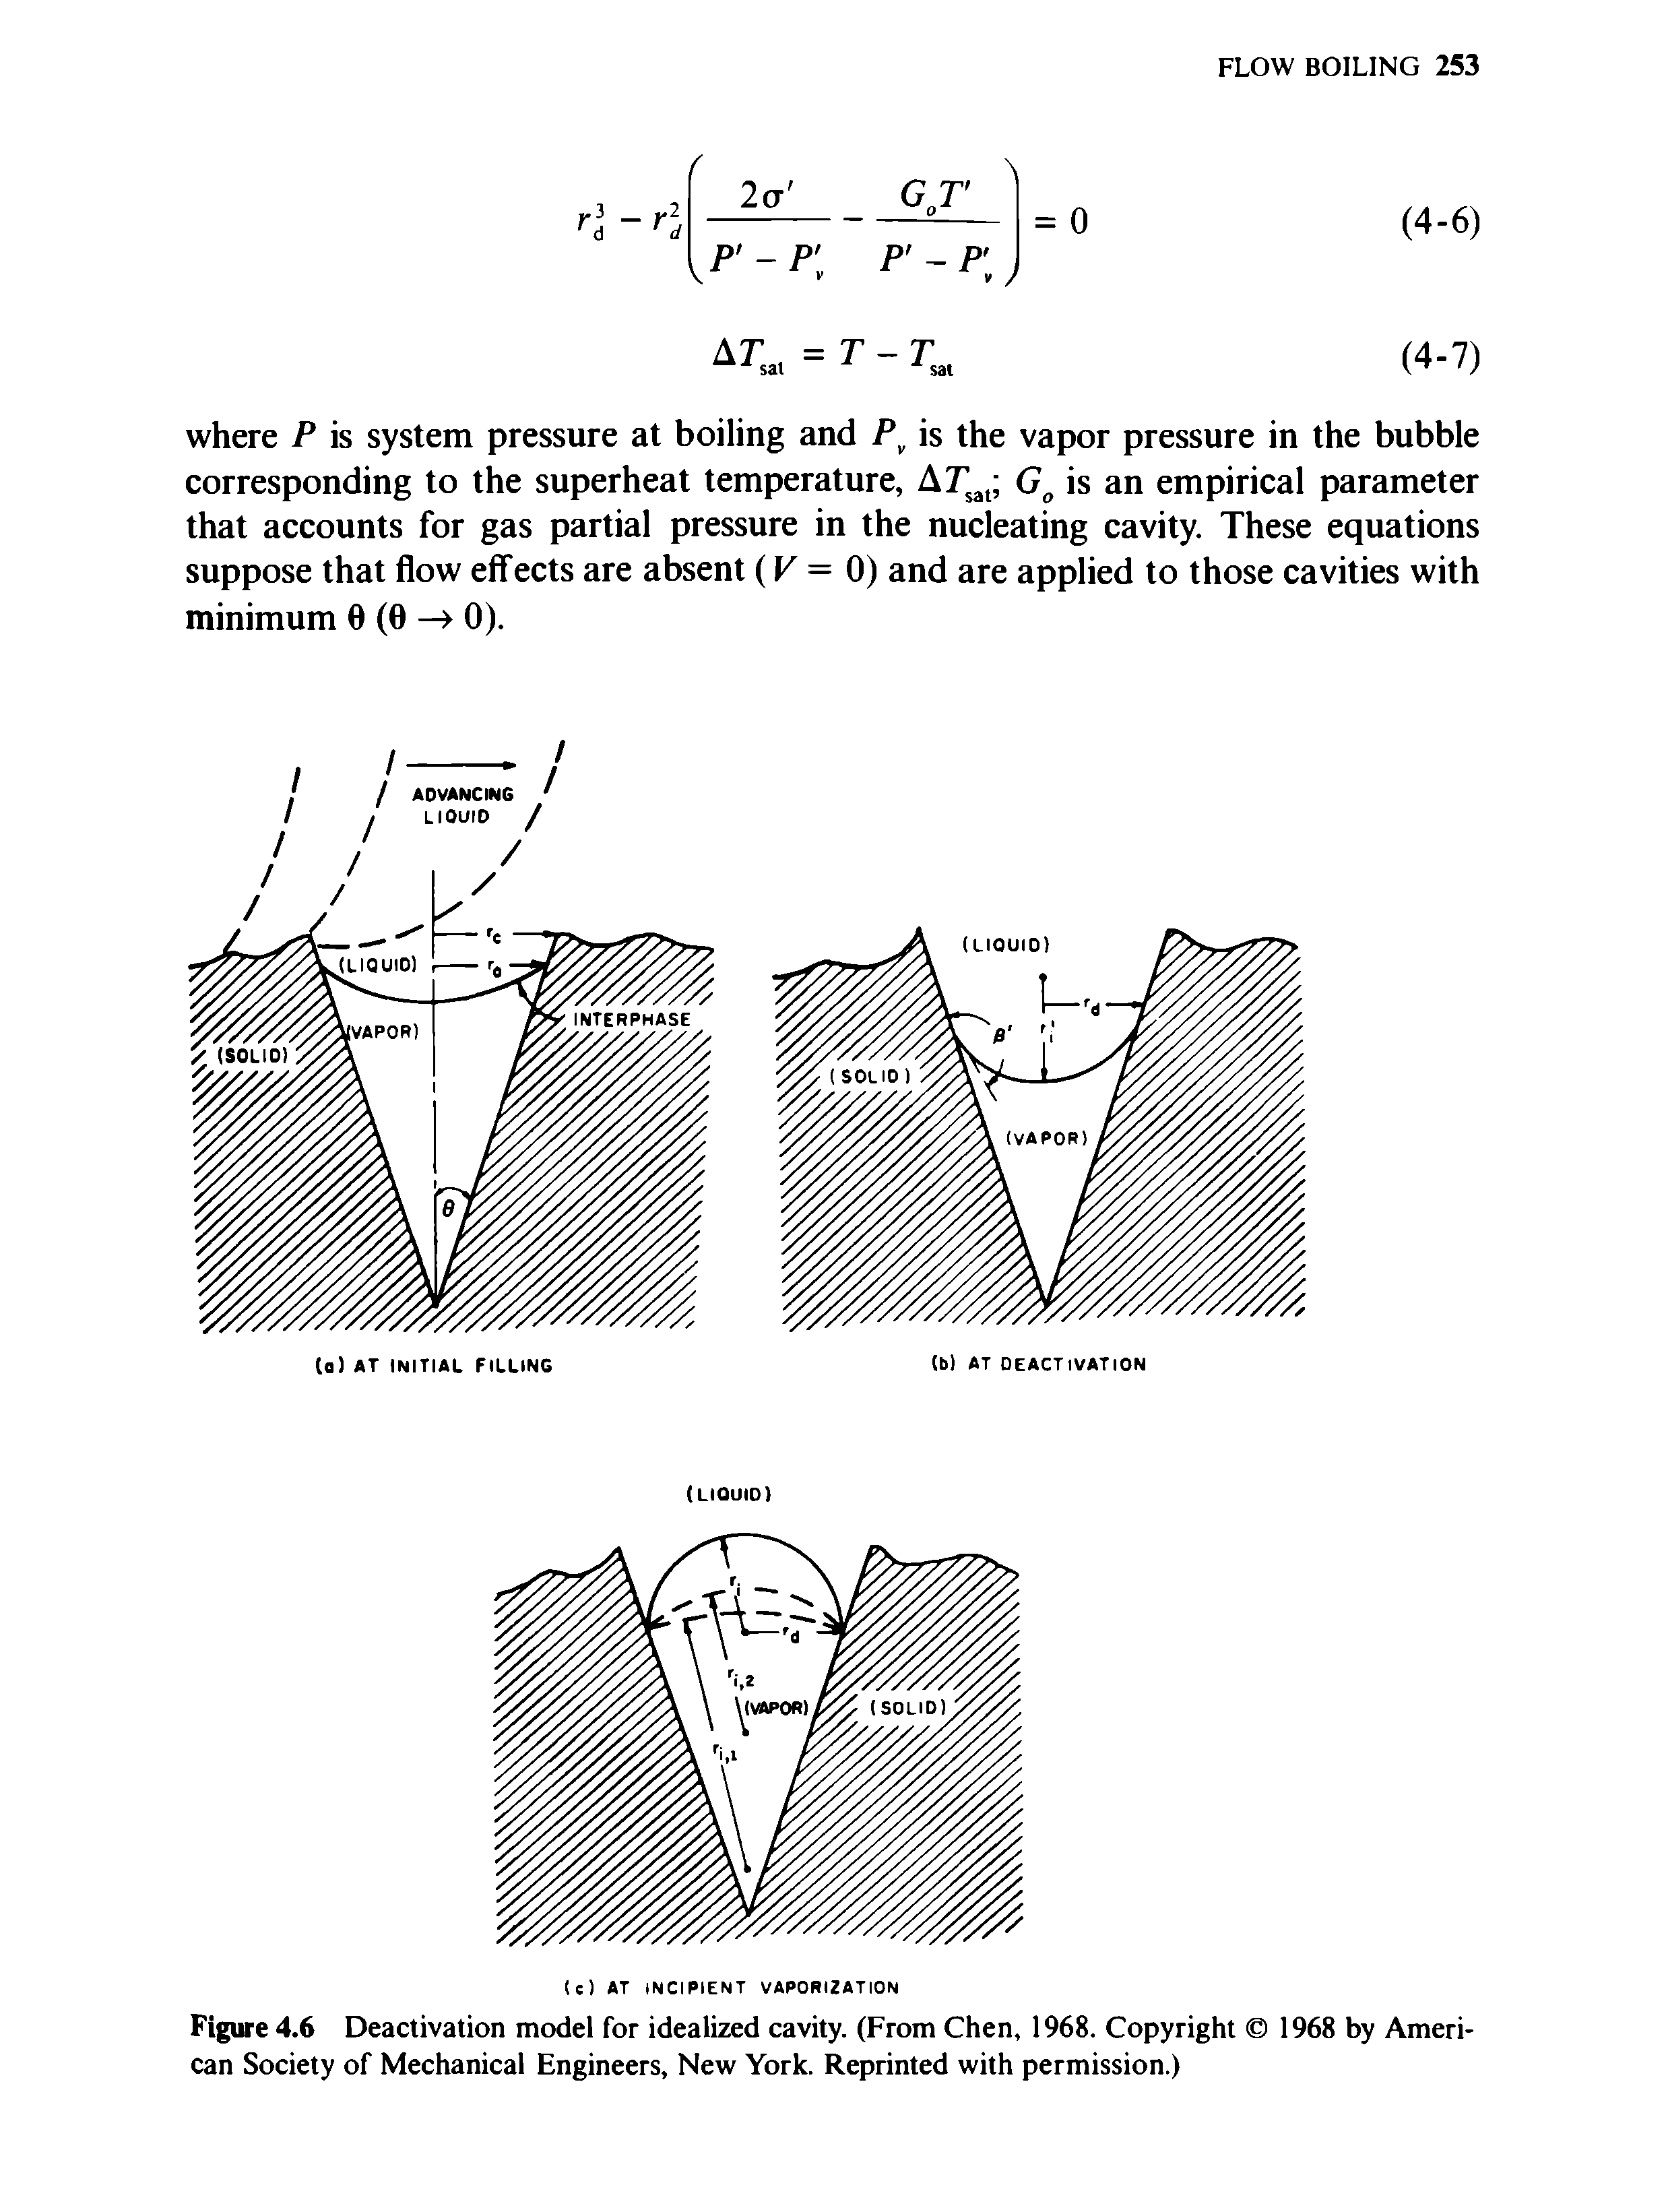 Figure 4.6 Deactivation model for idealized cavity. (From Chen, 1968. Copyright 1968 by American Society of Mechanical Engineers, New York. Reprinted with permission.)...